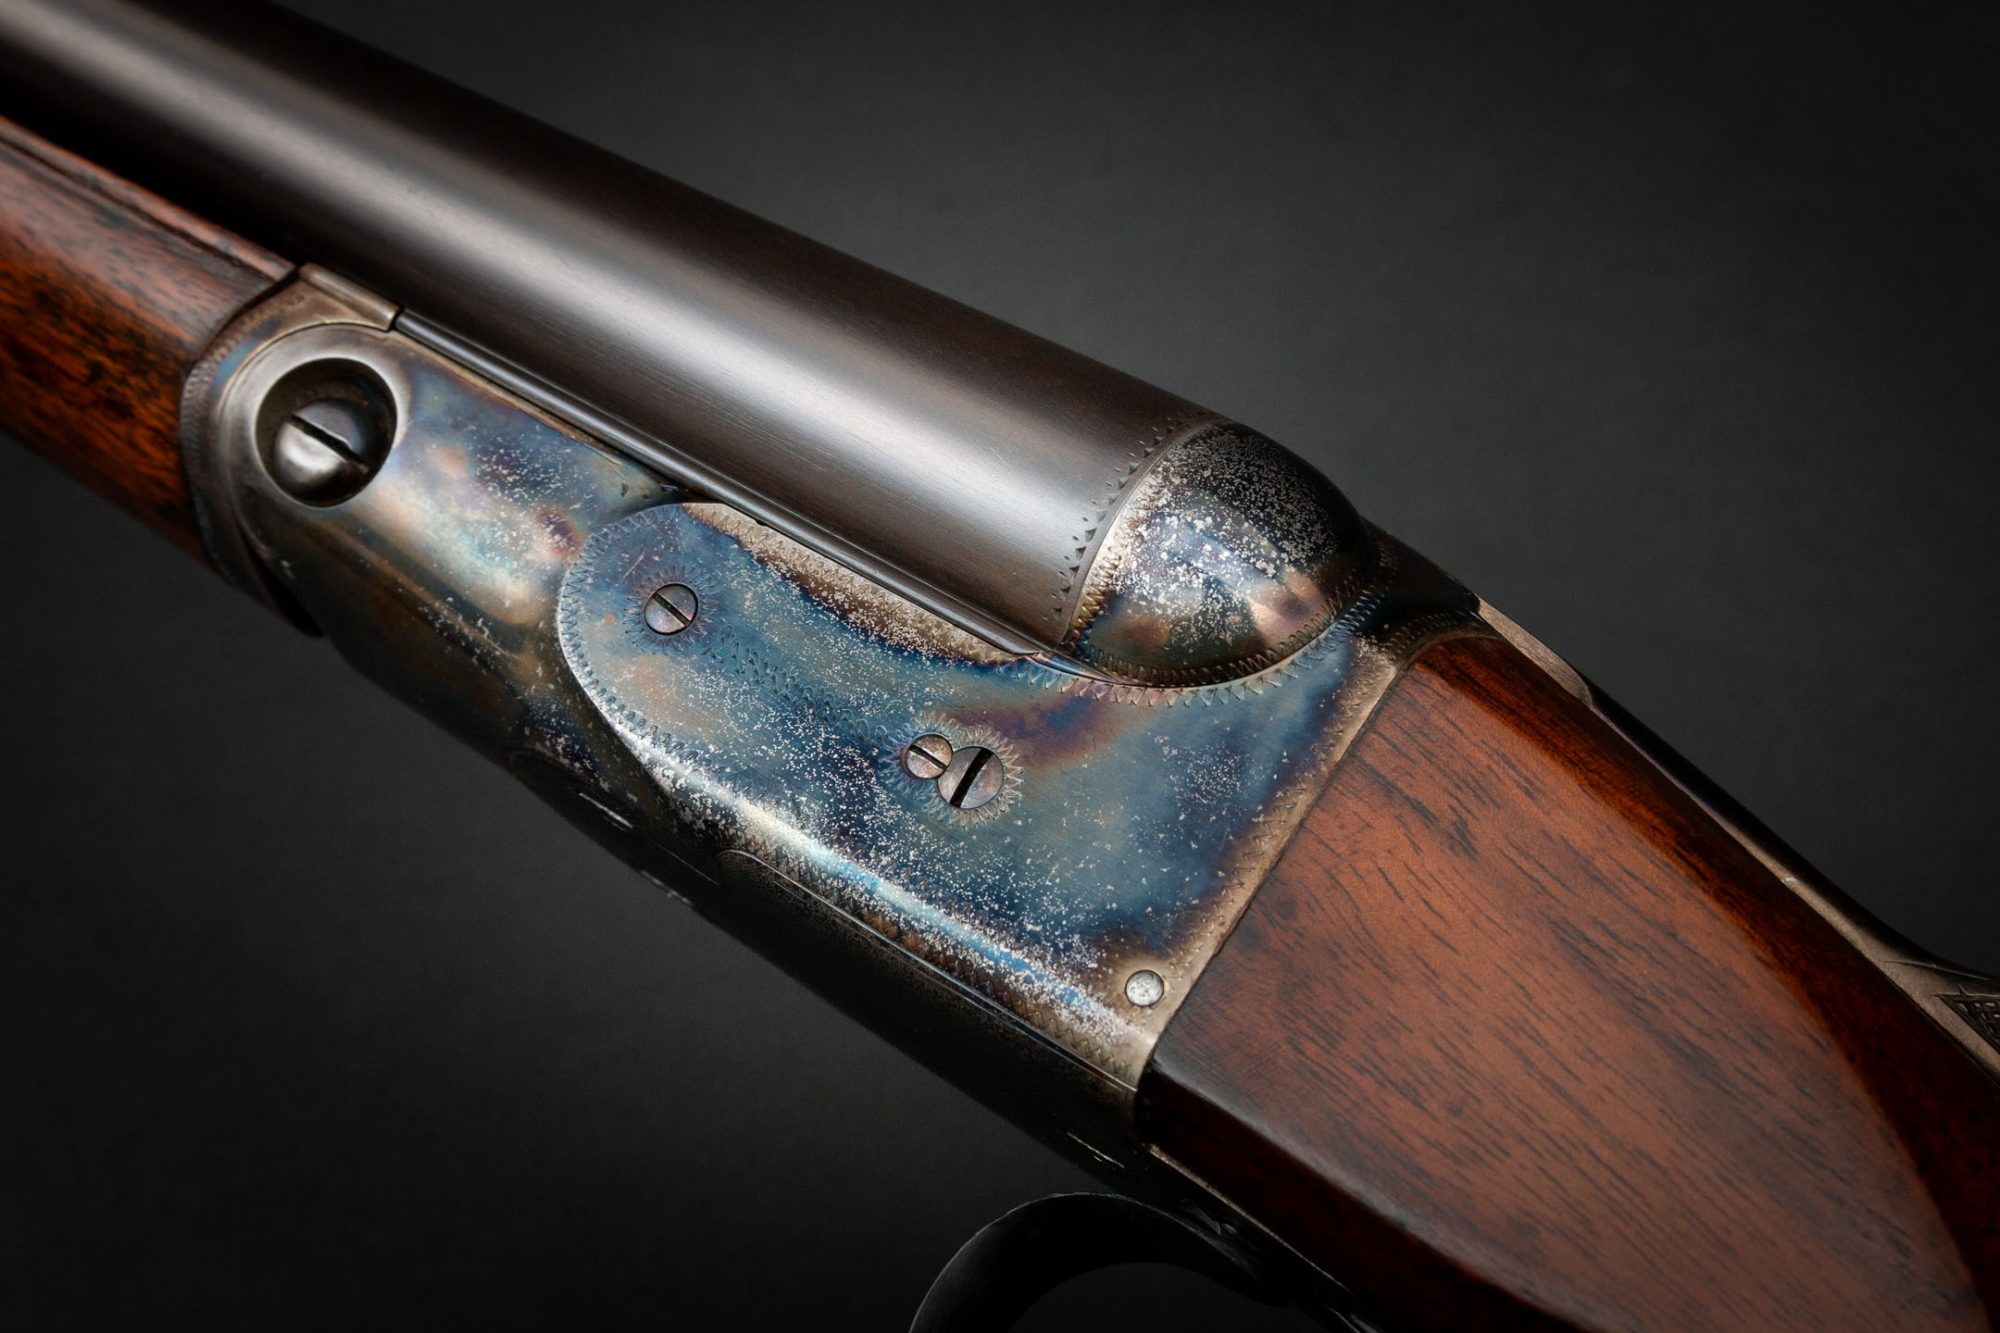 Parker VH 16 gauge shotgun with case colors by Turnbull Restoration Co., all other work by third party, for sale by Turnbull Restoration Co.